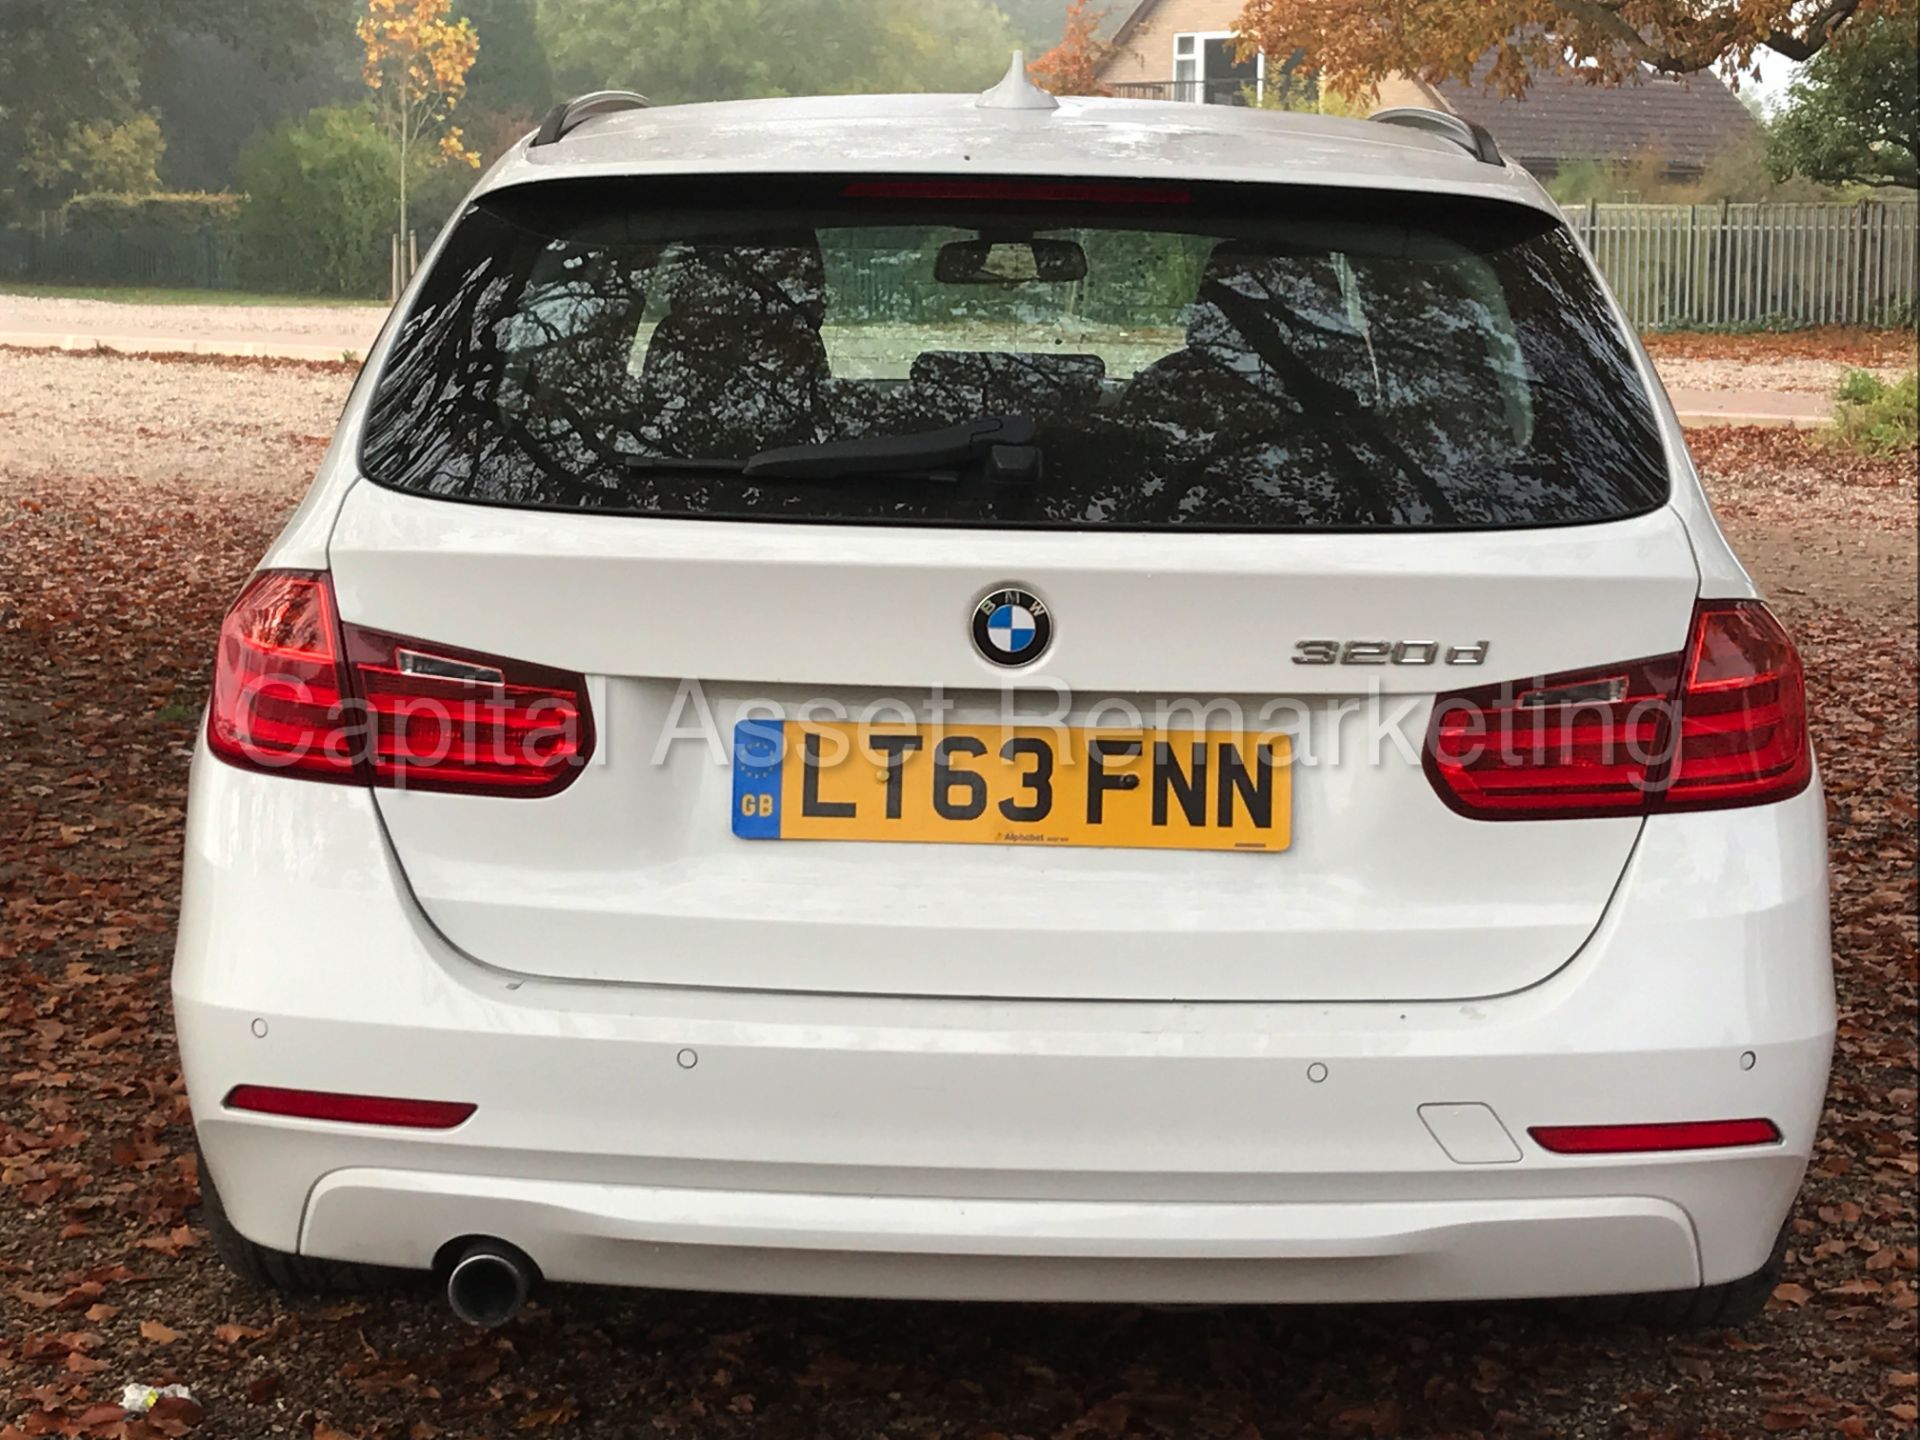 BMW 320d 'ESTATE / TOURING' (2014 MODEL) 8 SPEED AUTO - SAT NAV **FULLY LOADED** (1 OWNER FROM NEW) - Image 6 of 25